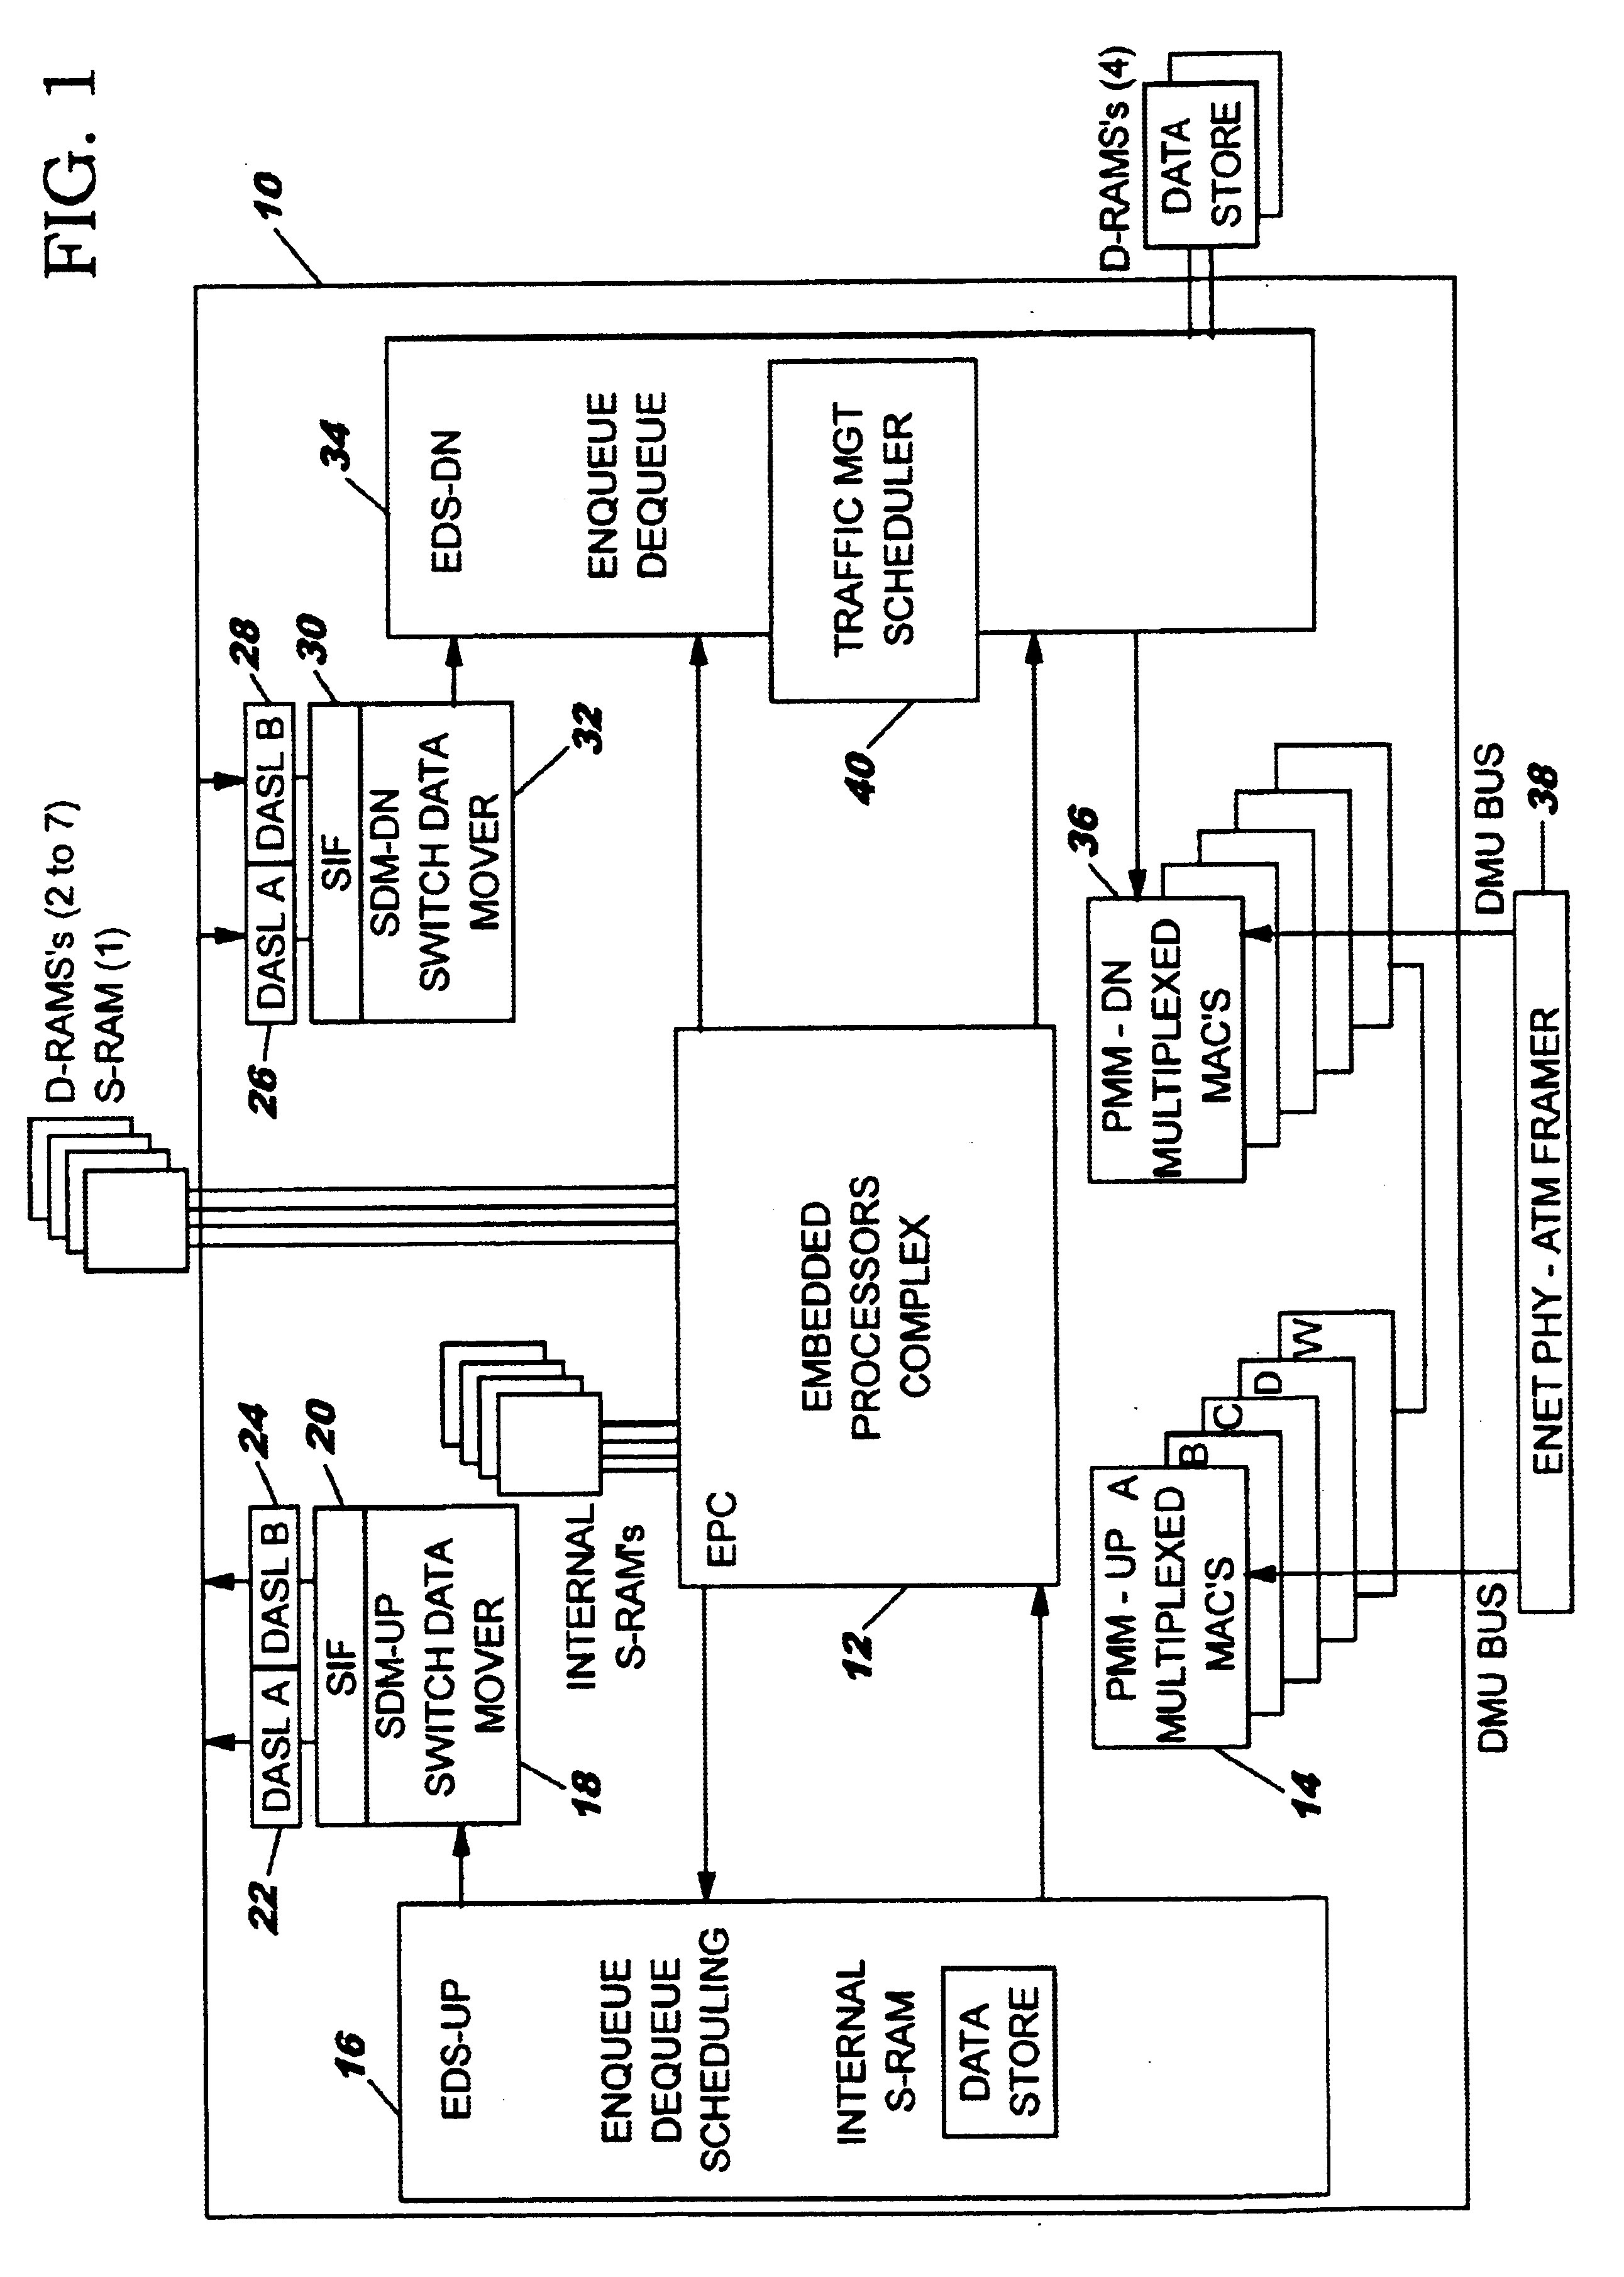 Method and system for network processor scheduling outputs based on multiple calendars